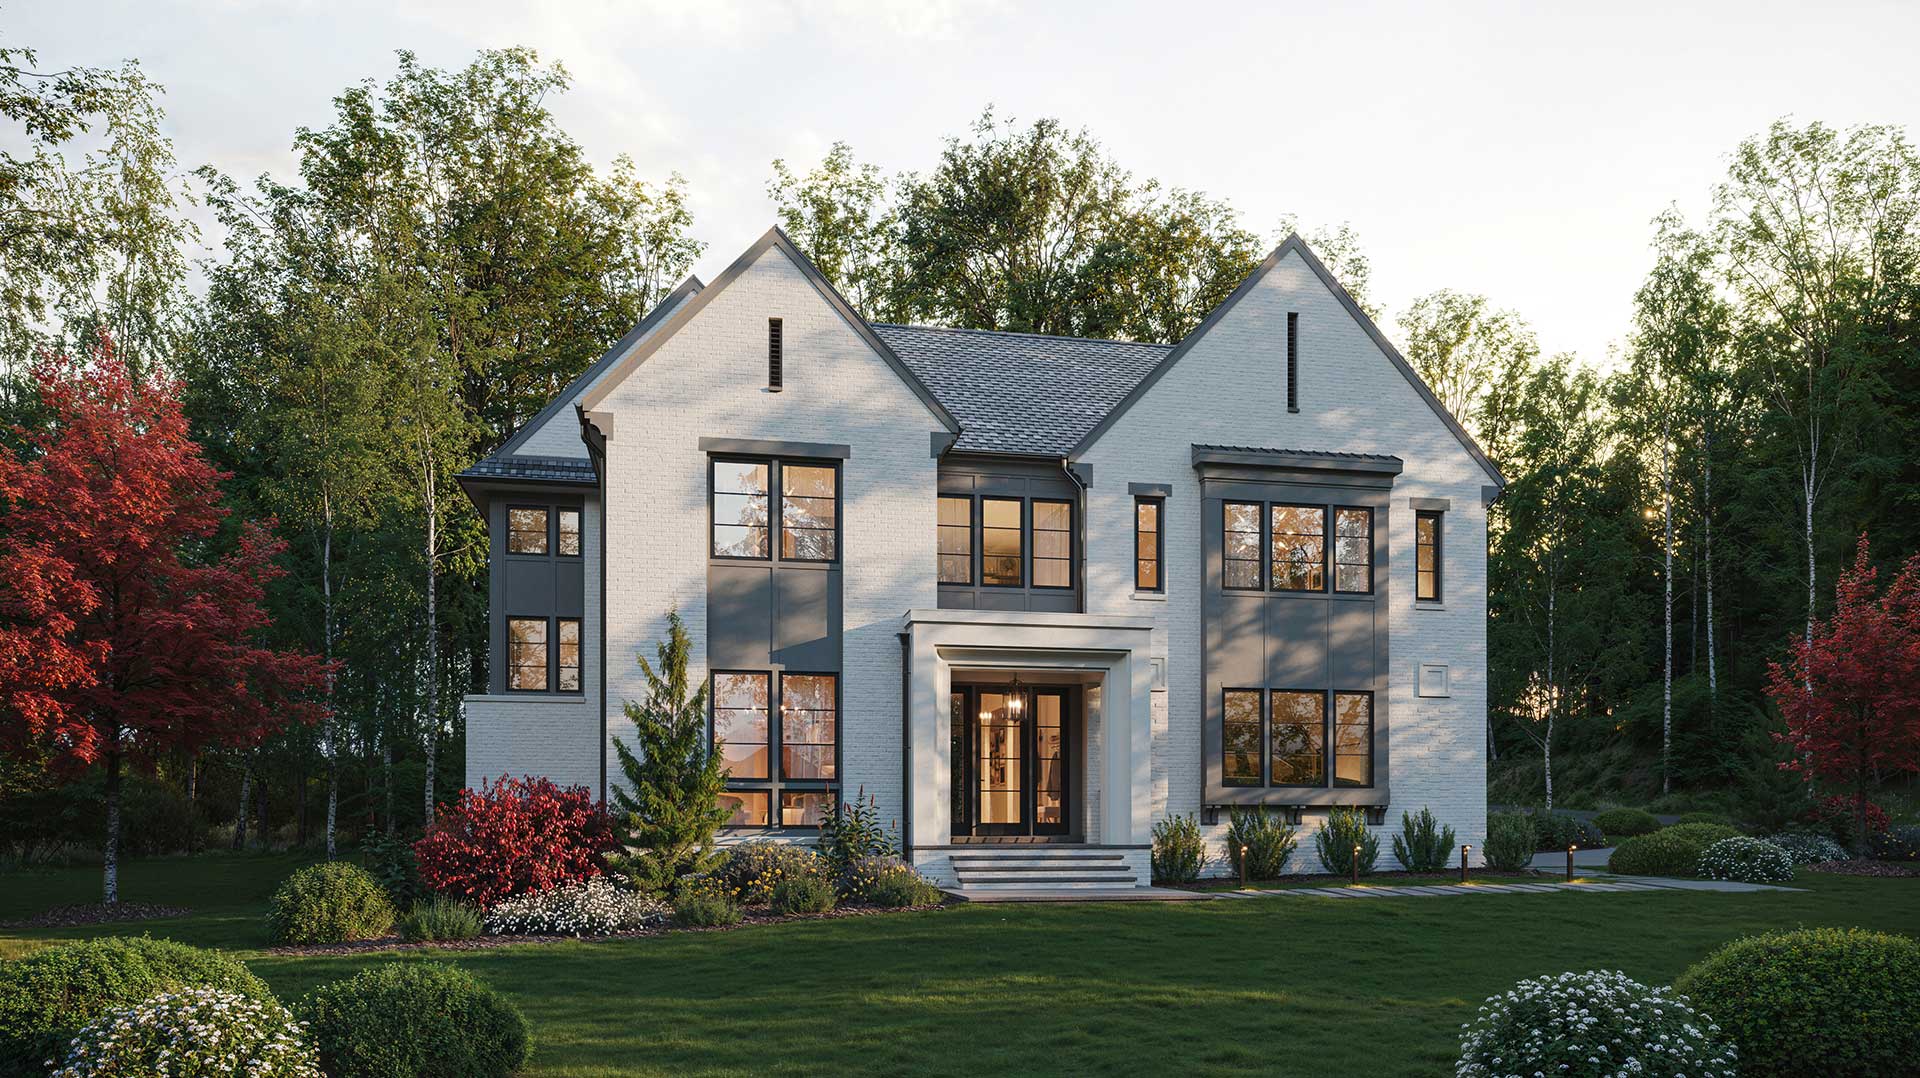 A tudor inspired front home elevation with white painted brick and custom patterned window assemblies